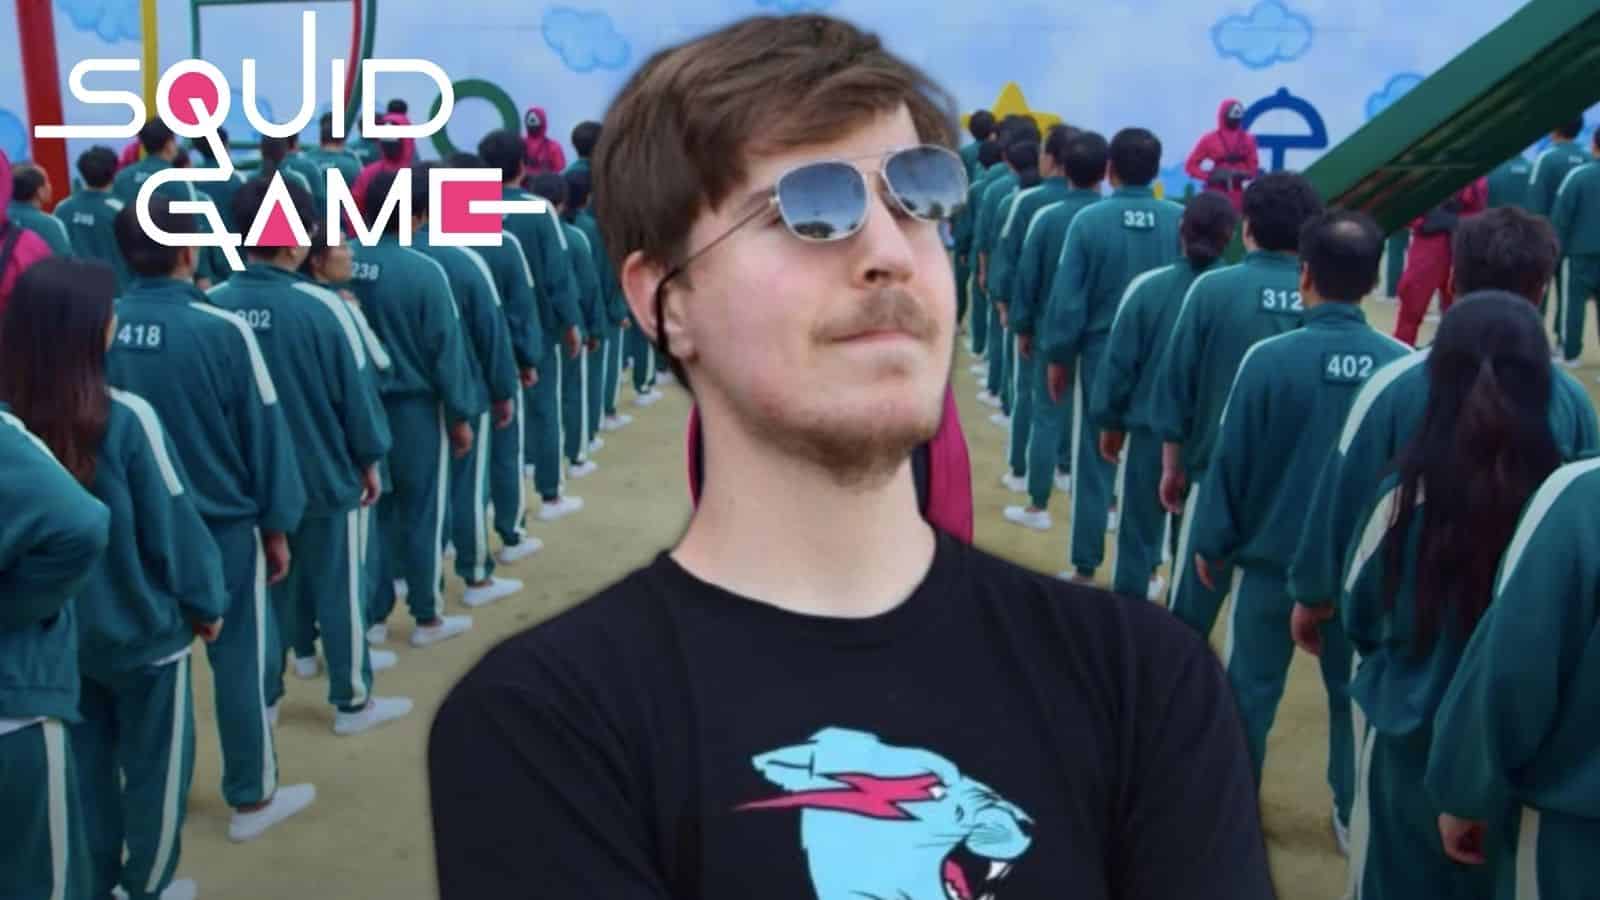 Netflix show “Squid Game” goes viral after millions watch – The